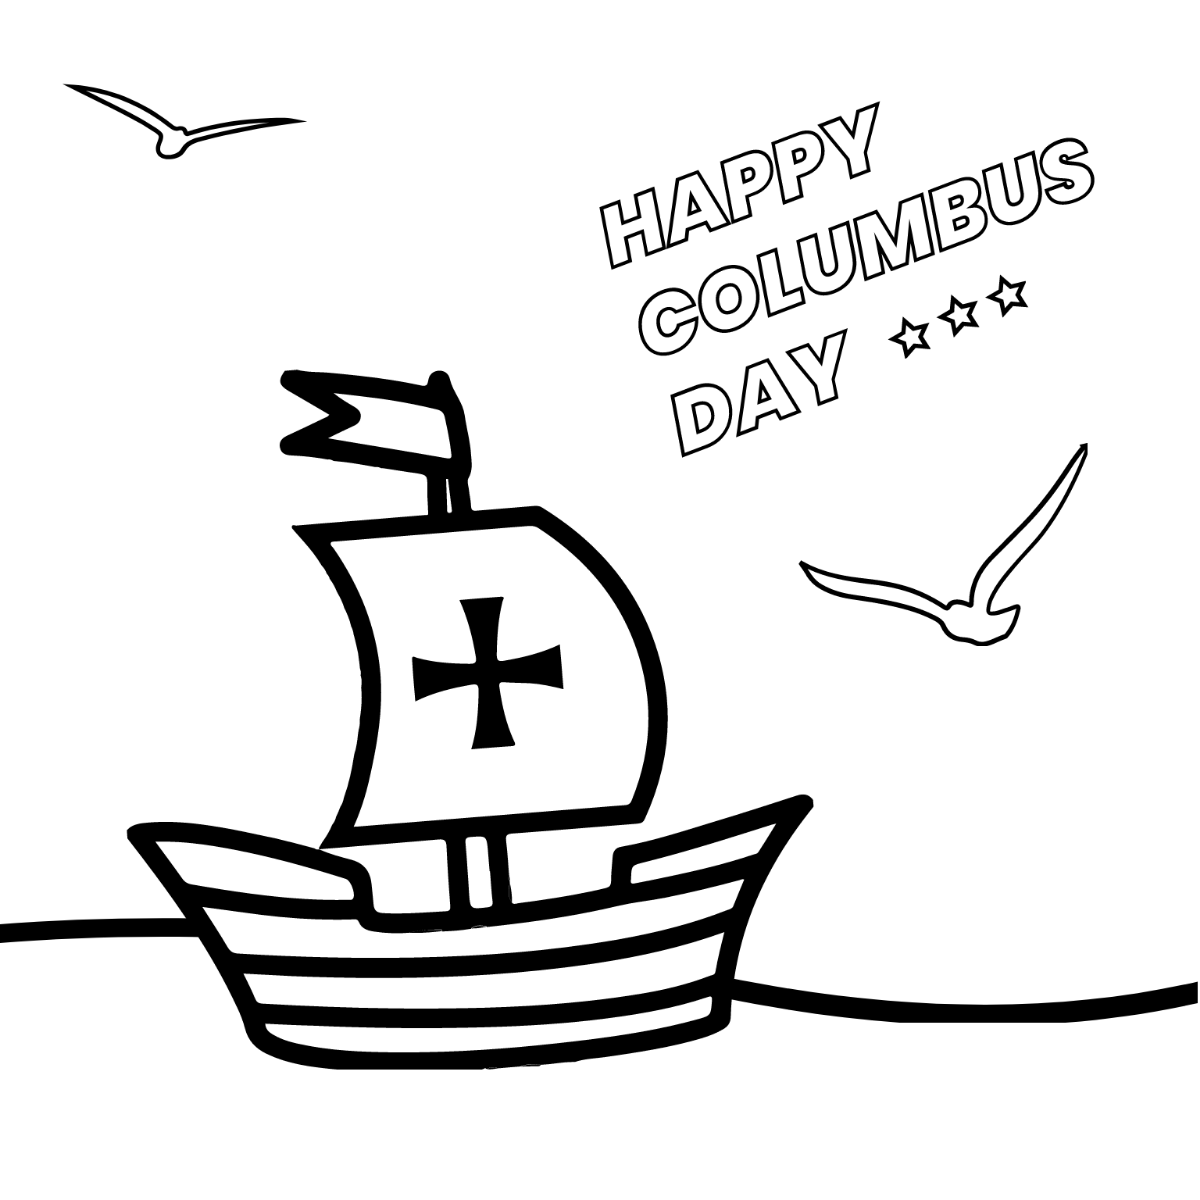 Columbus Day Image Drawing Template